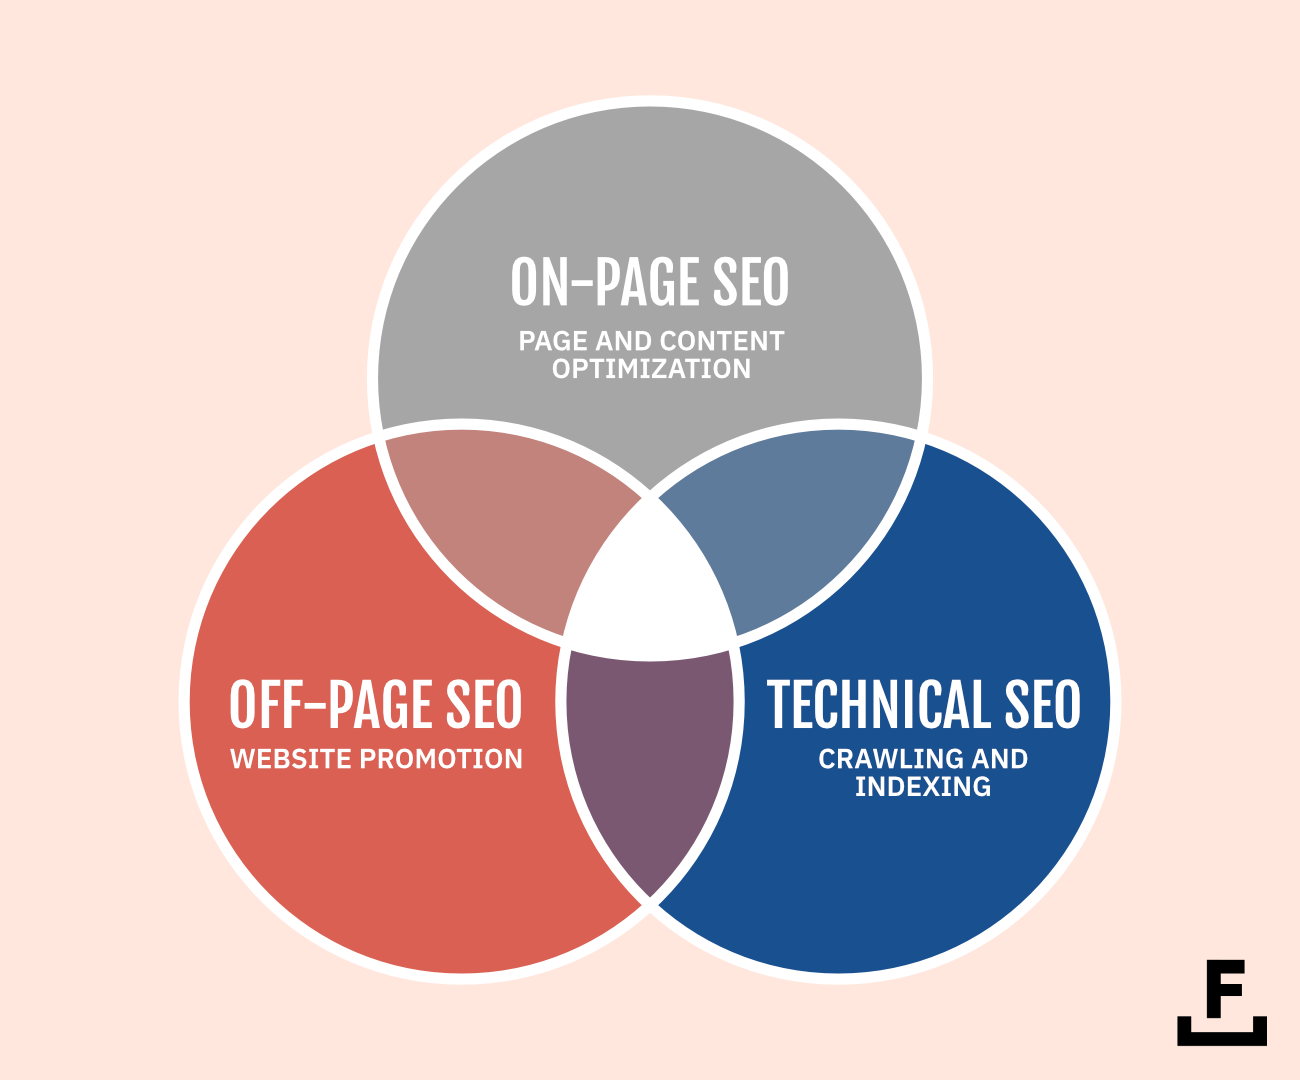 A Venn diagram shows the intersections of on-page S E O, technical S E O, and off-page S E O